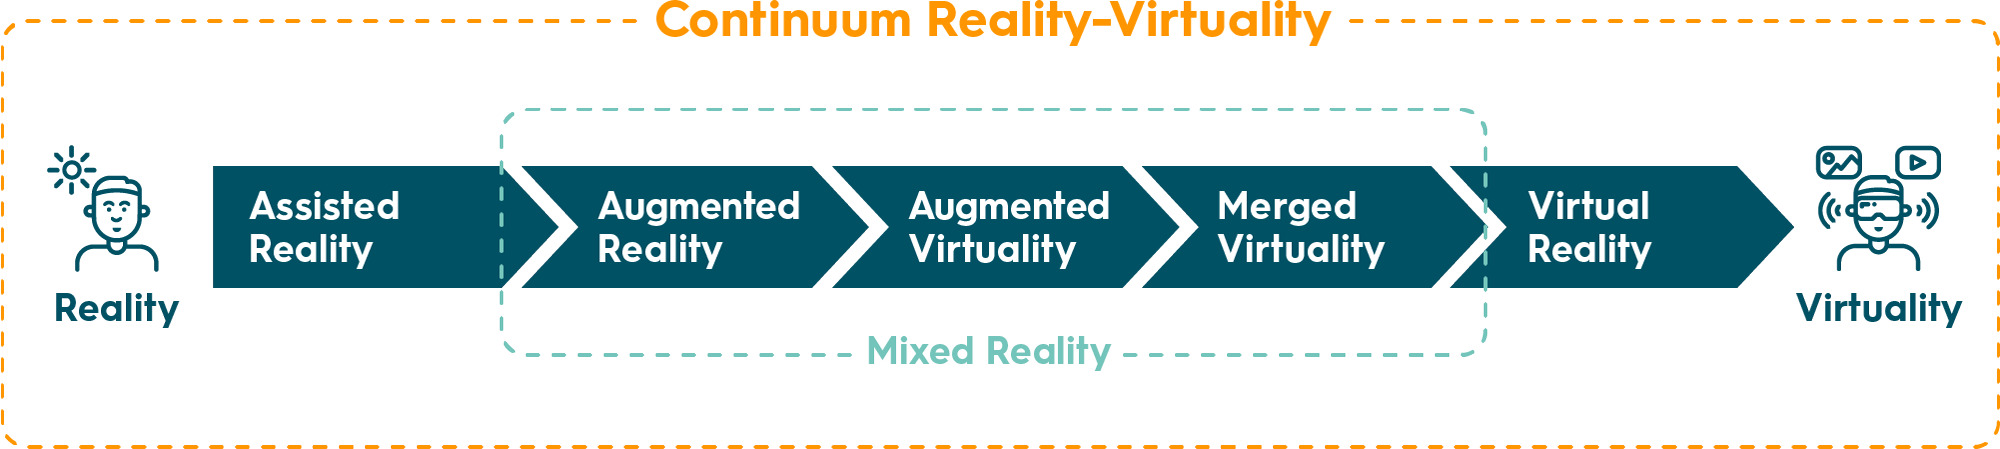 Continuum Reality Virtuality; IoT Security; IoT Ökosystem; Immersive Technologien; AR; VR; CyOne Security